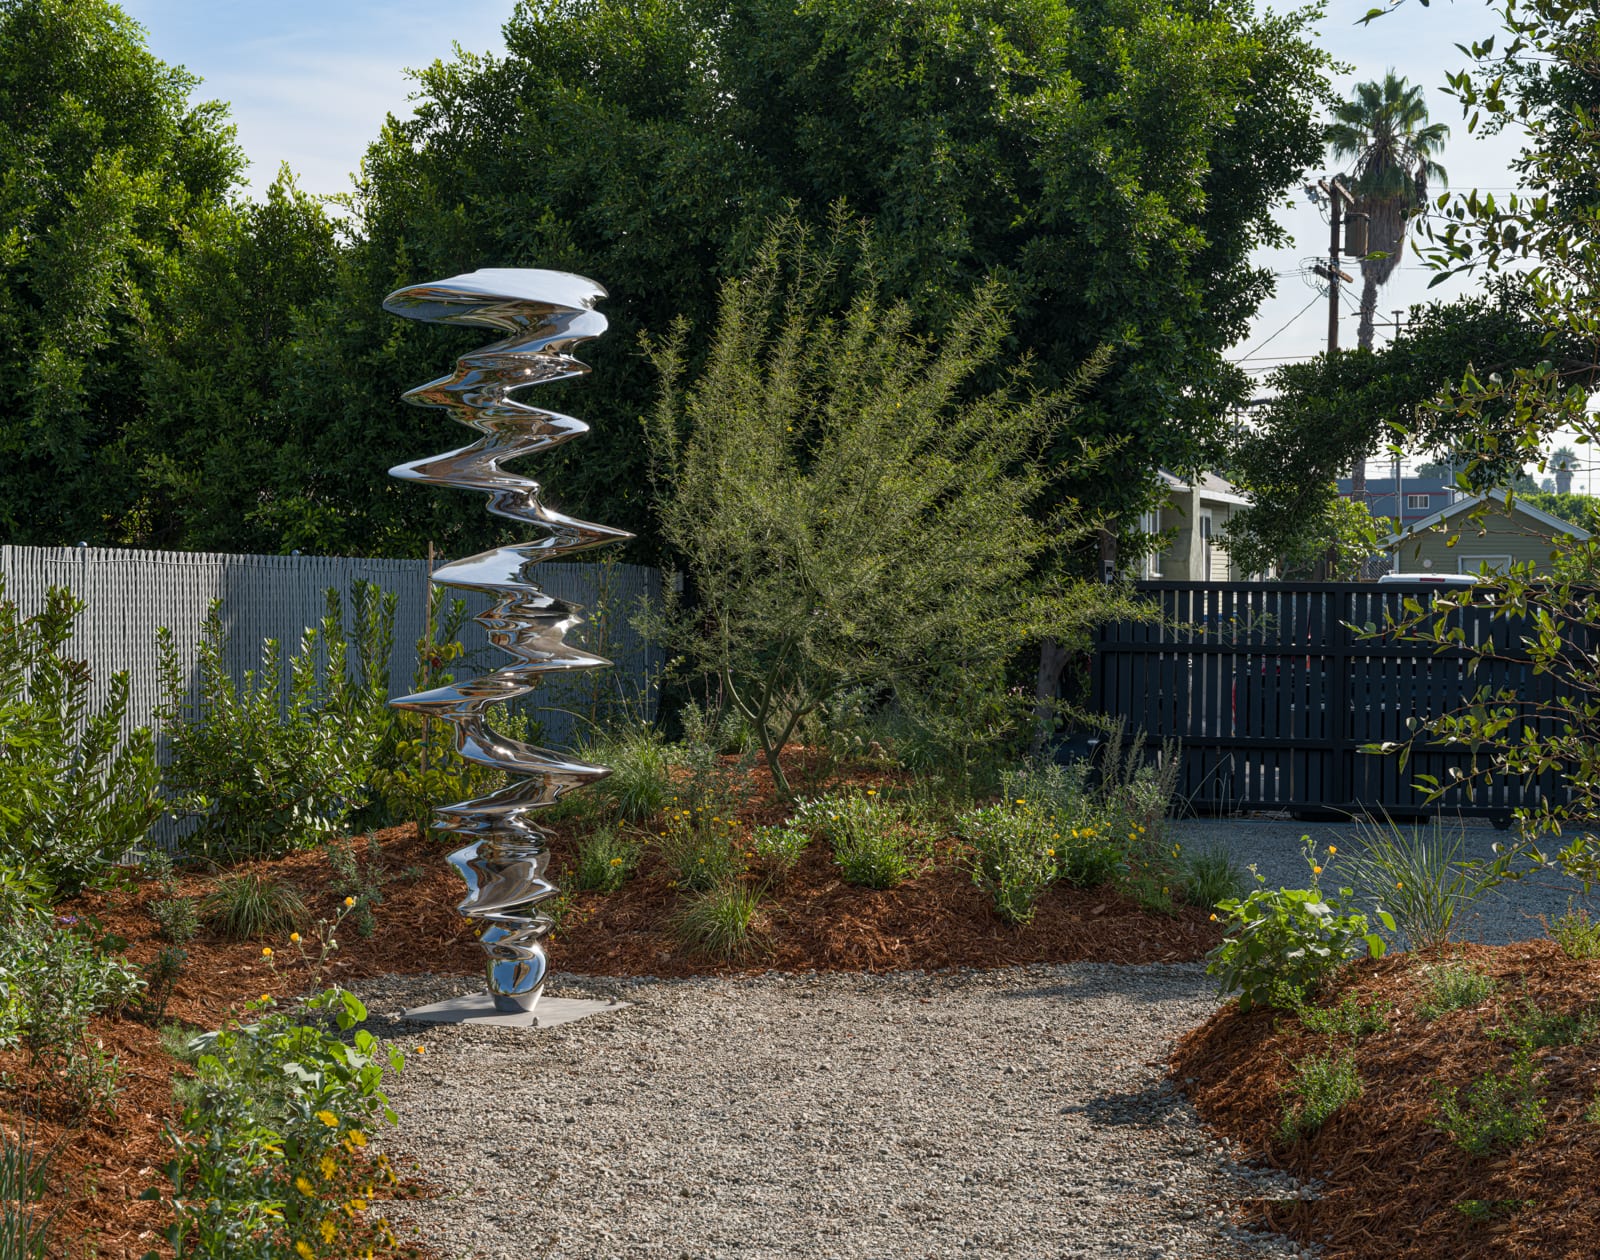 silver sculpture by Tony Cragg in the garden at Marian Goodman Gallery Los Angeles